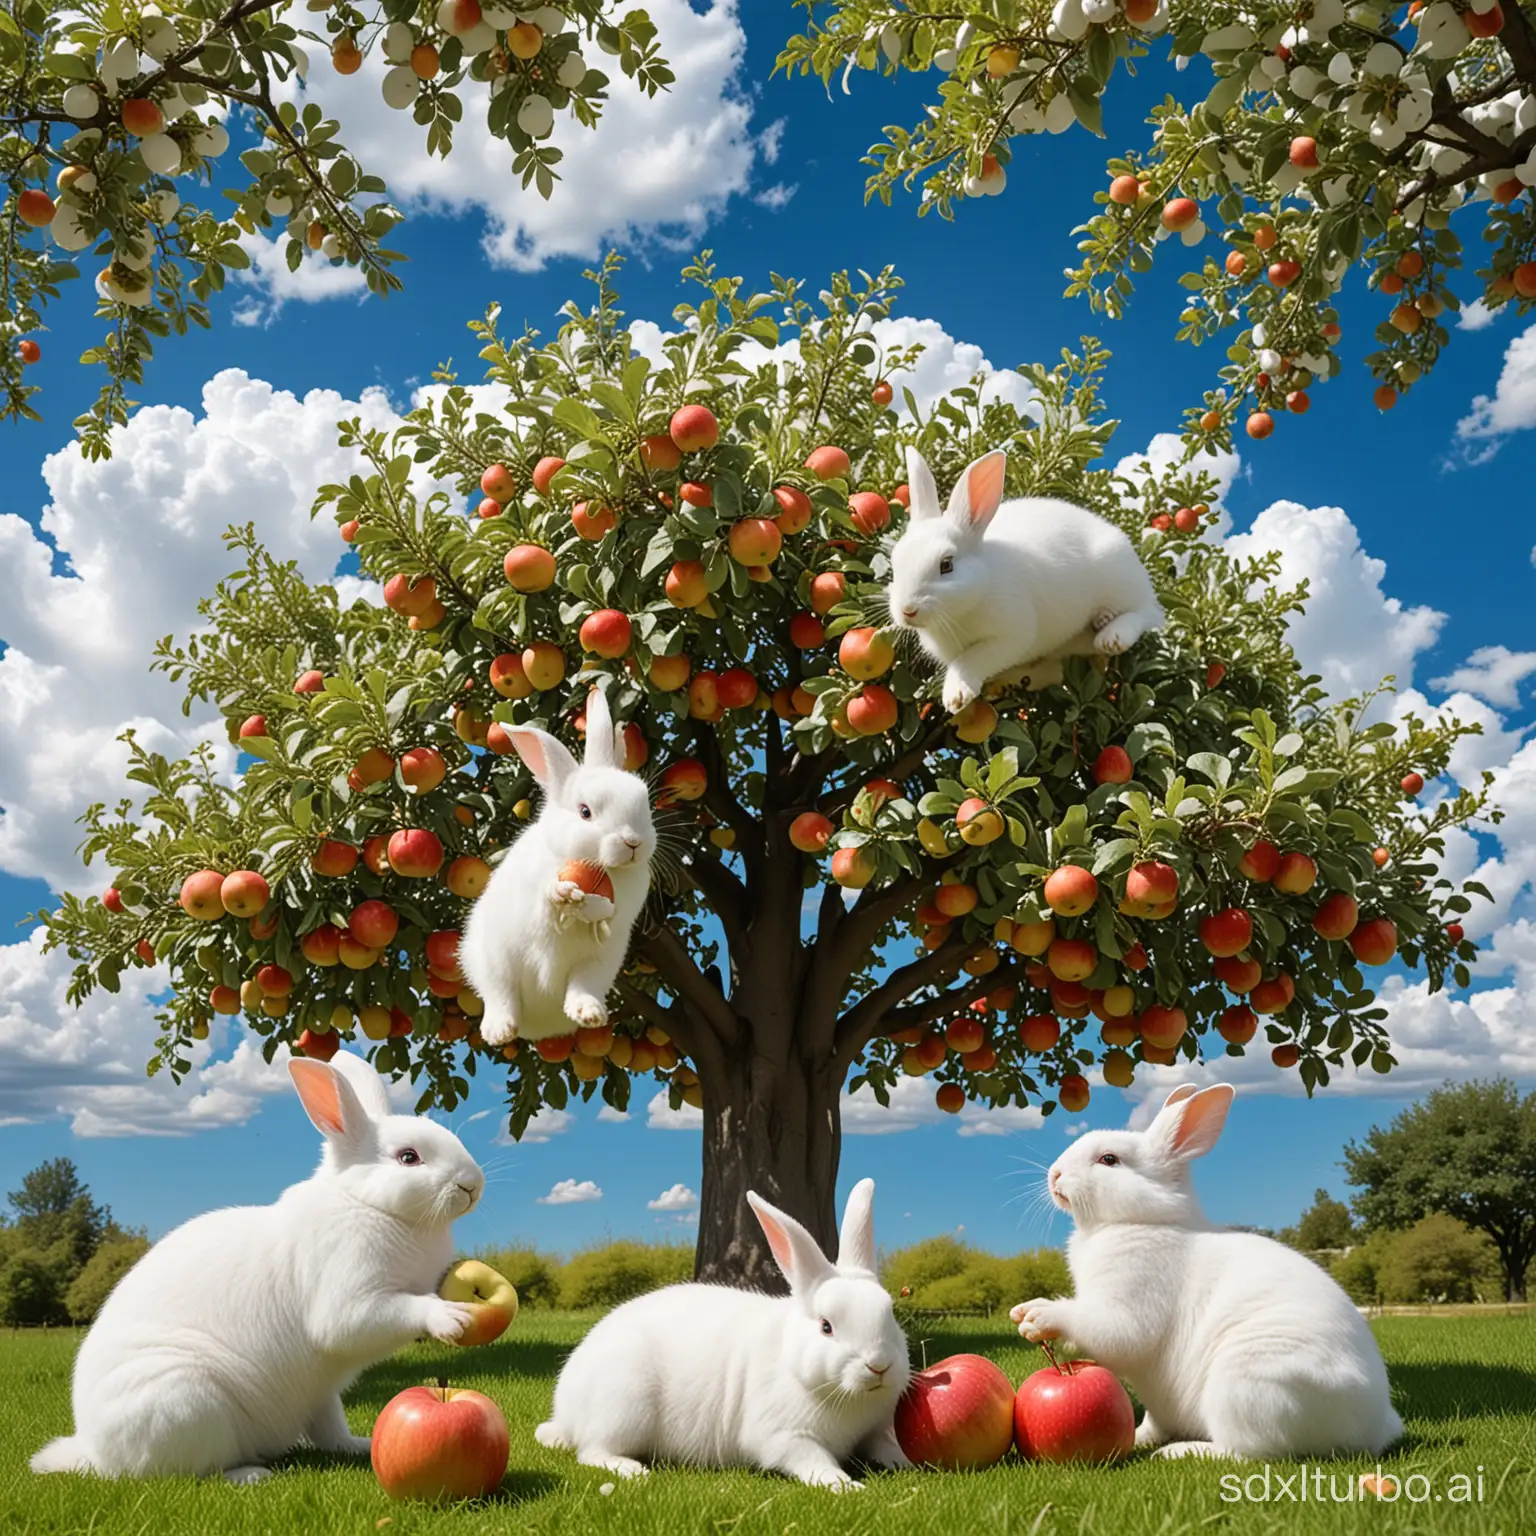 4 white color bunnies eating apples under an big apple tree, blue sky, white clouds